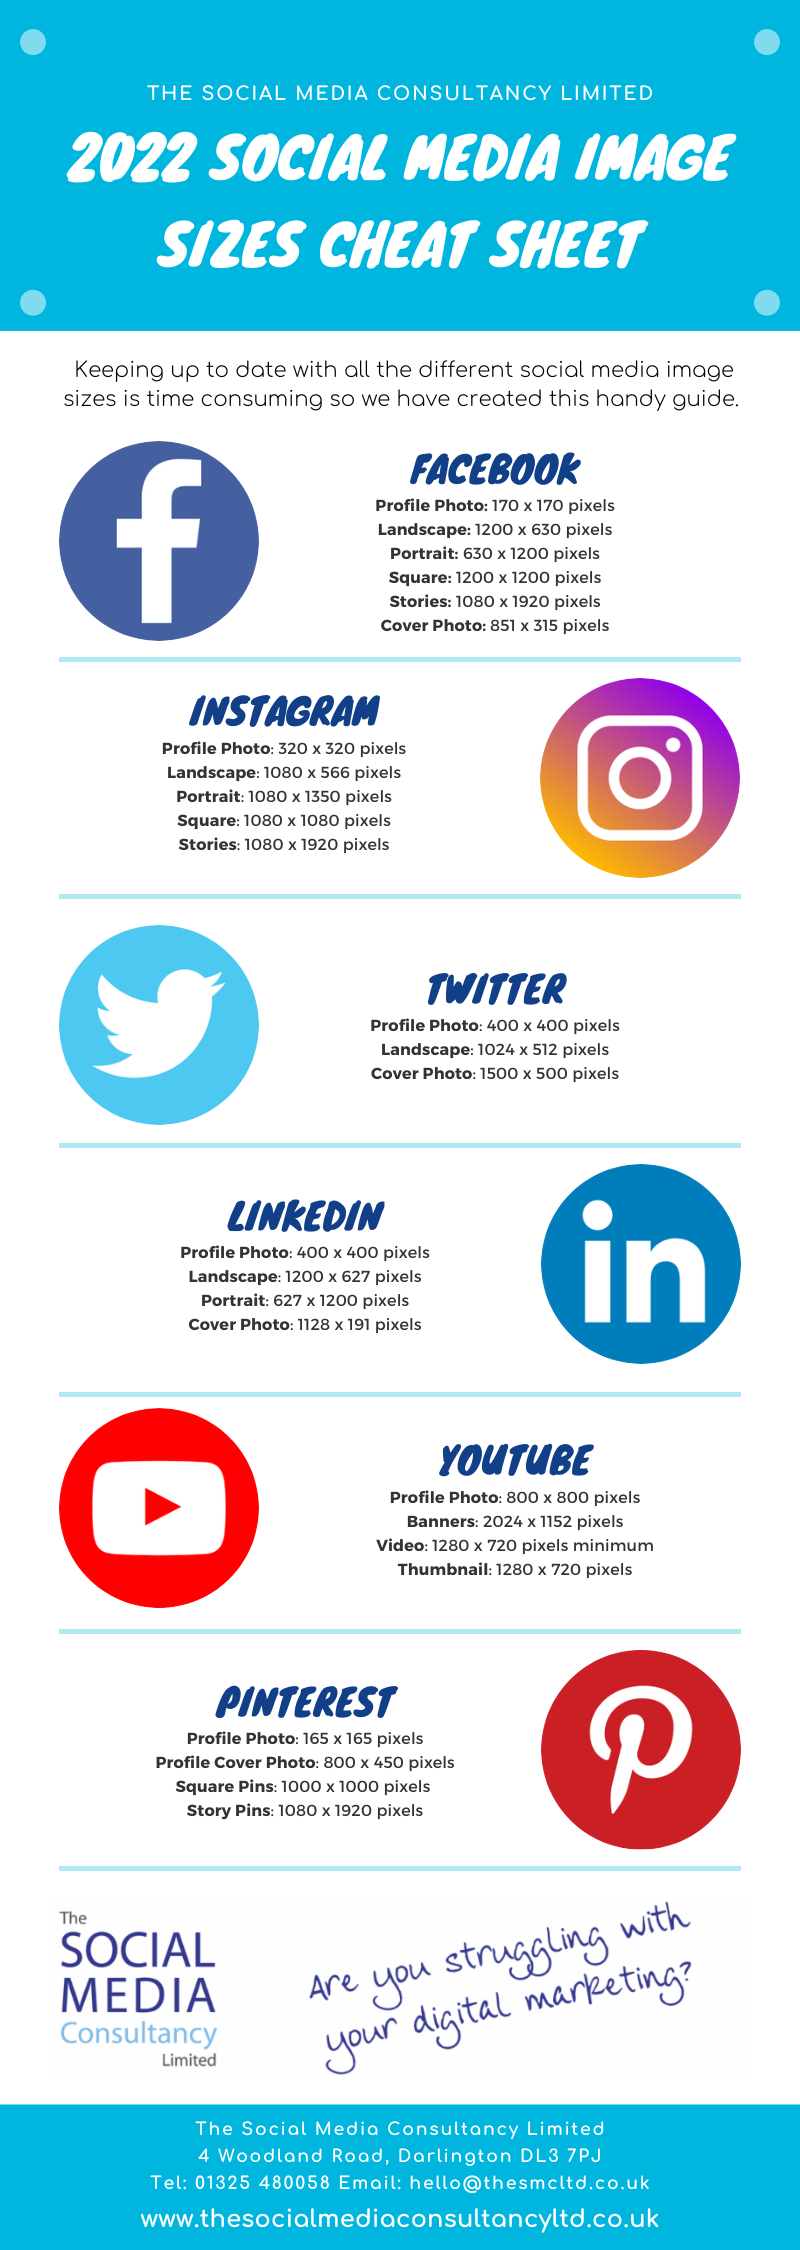 2022 Social Media Image Sizes Cheat Sheet | The Social Media Consultancy Limited